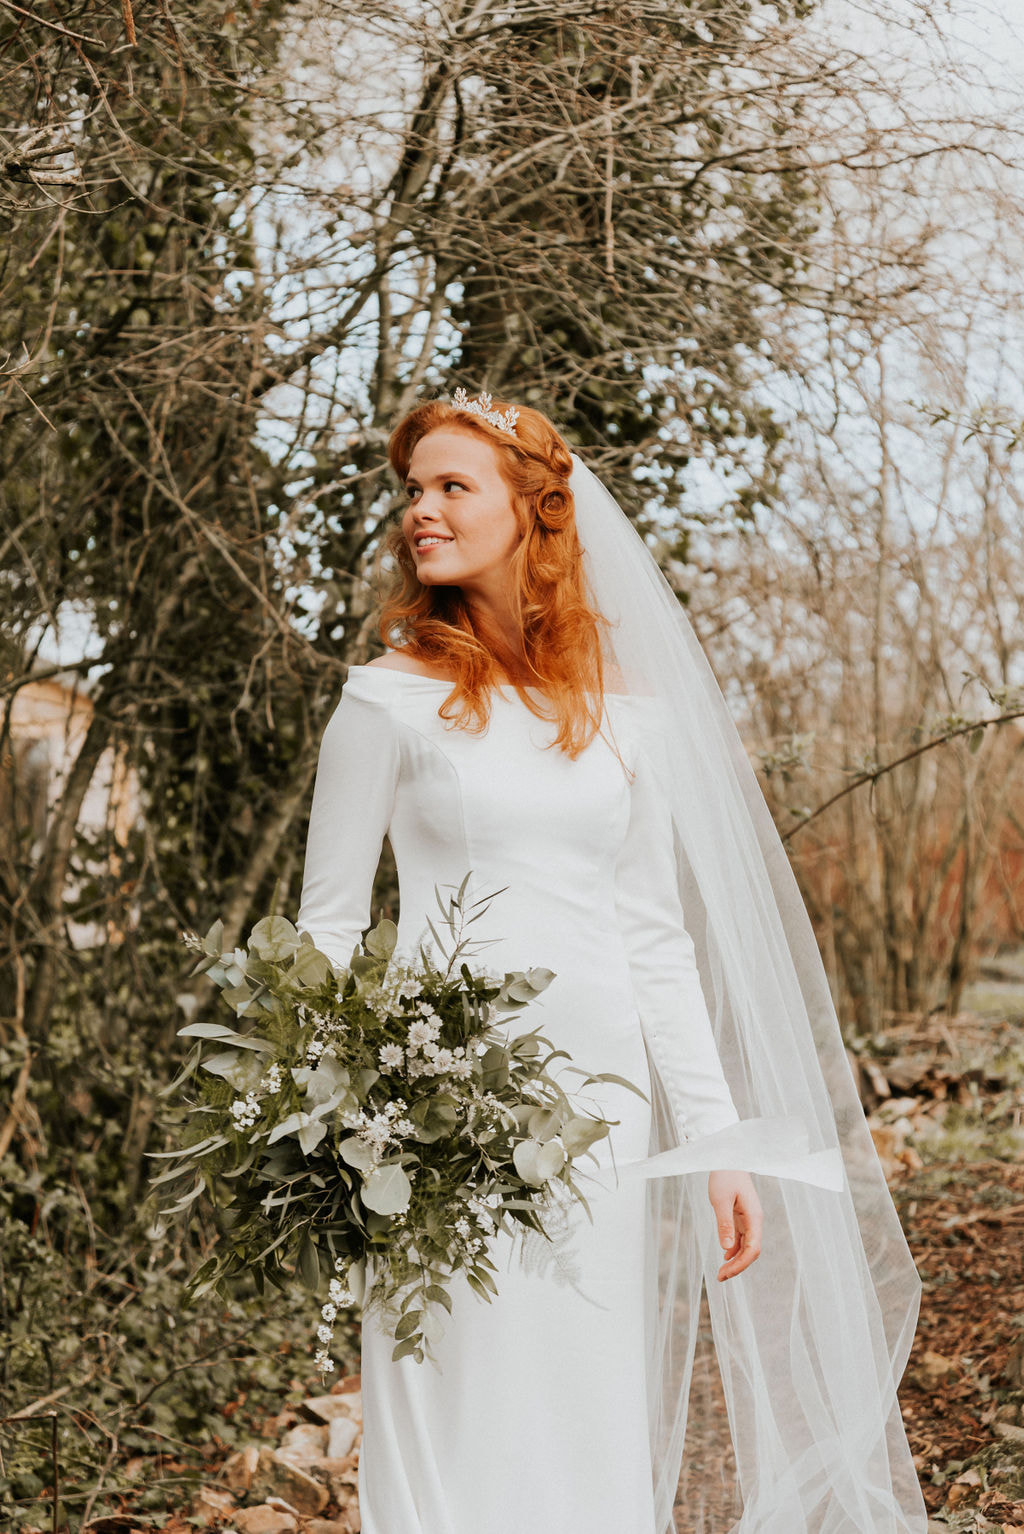 exquisite plain simple bridal long sleeve dress with long veil auburn hair and hairband with leafy bouquet in a Winter setting